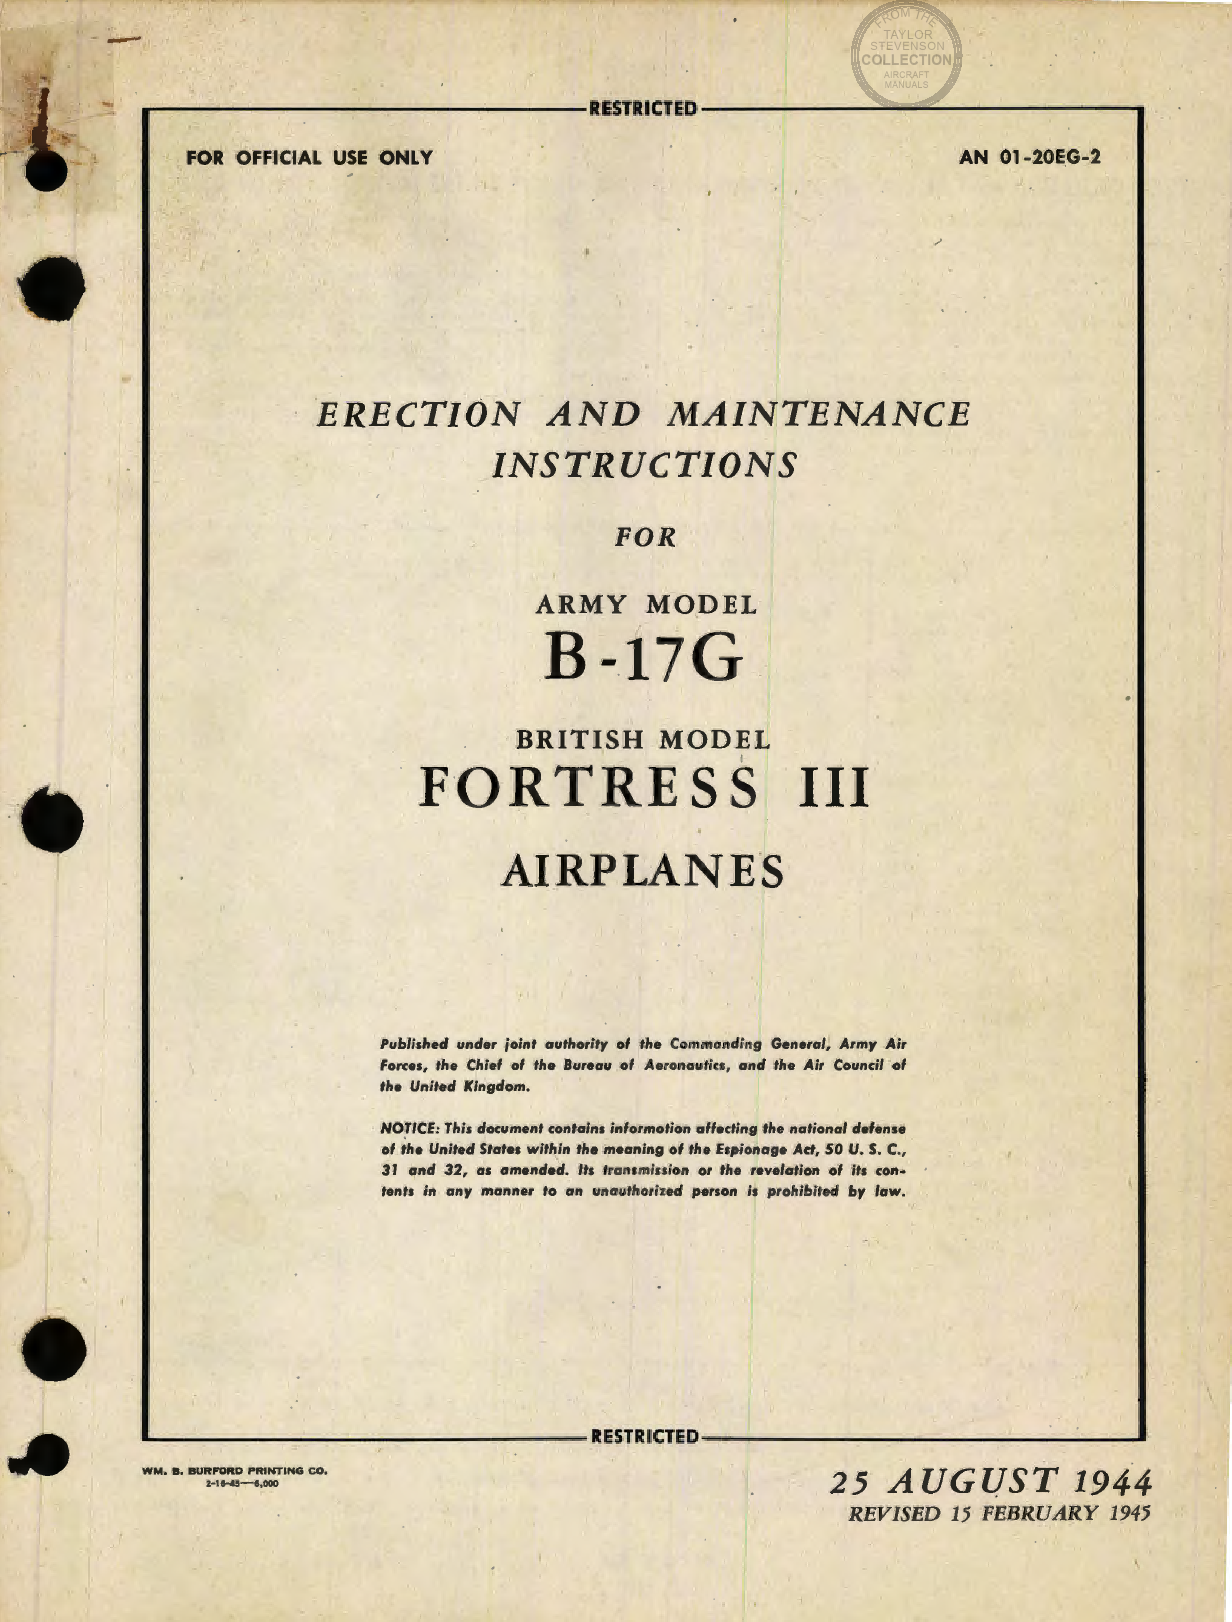 Sample page 1 from AirCorps Library document: Erection and Maintenance Instructions for B-17G (Fortress III) Airplanes